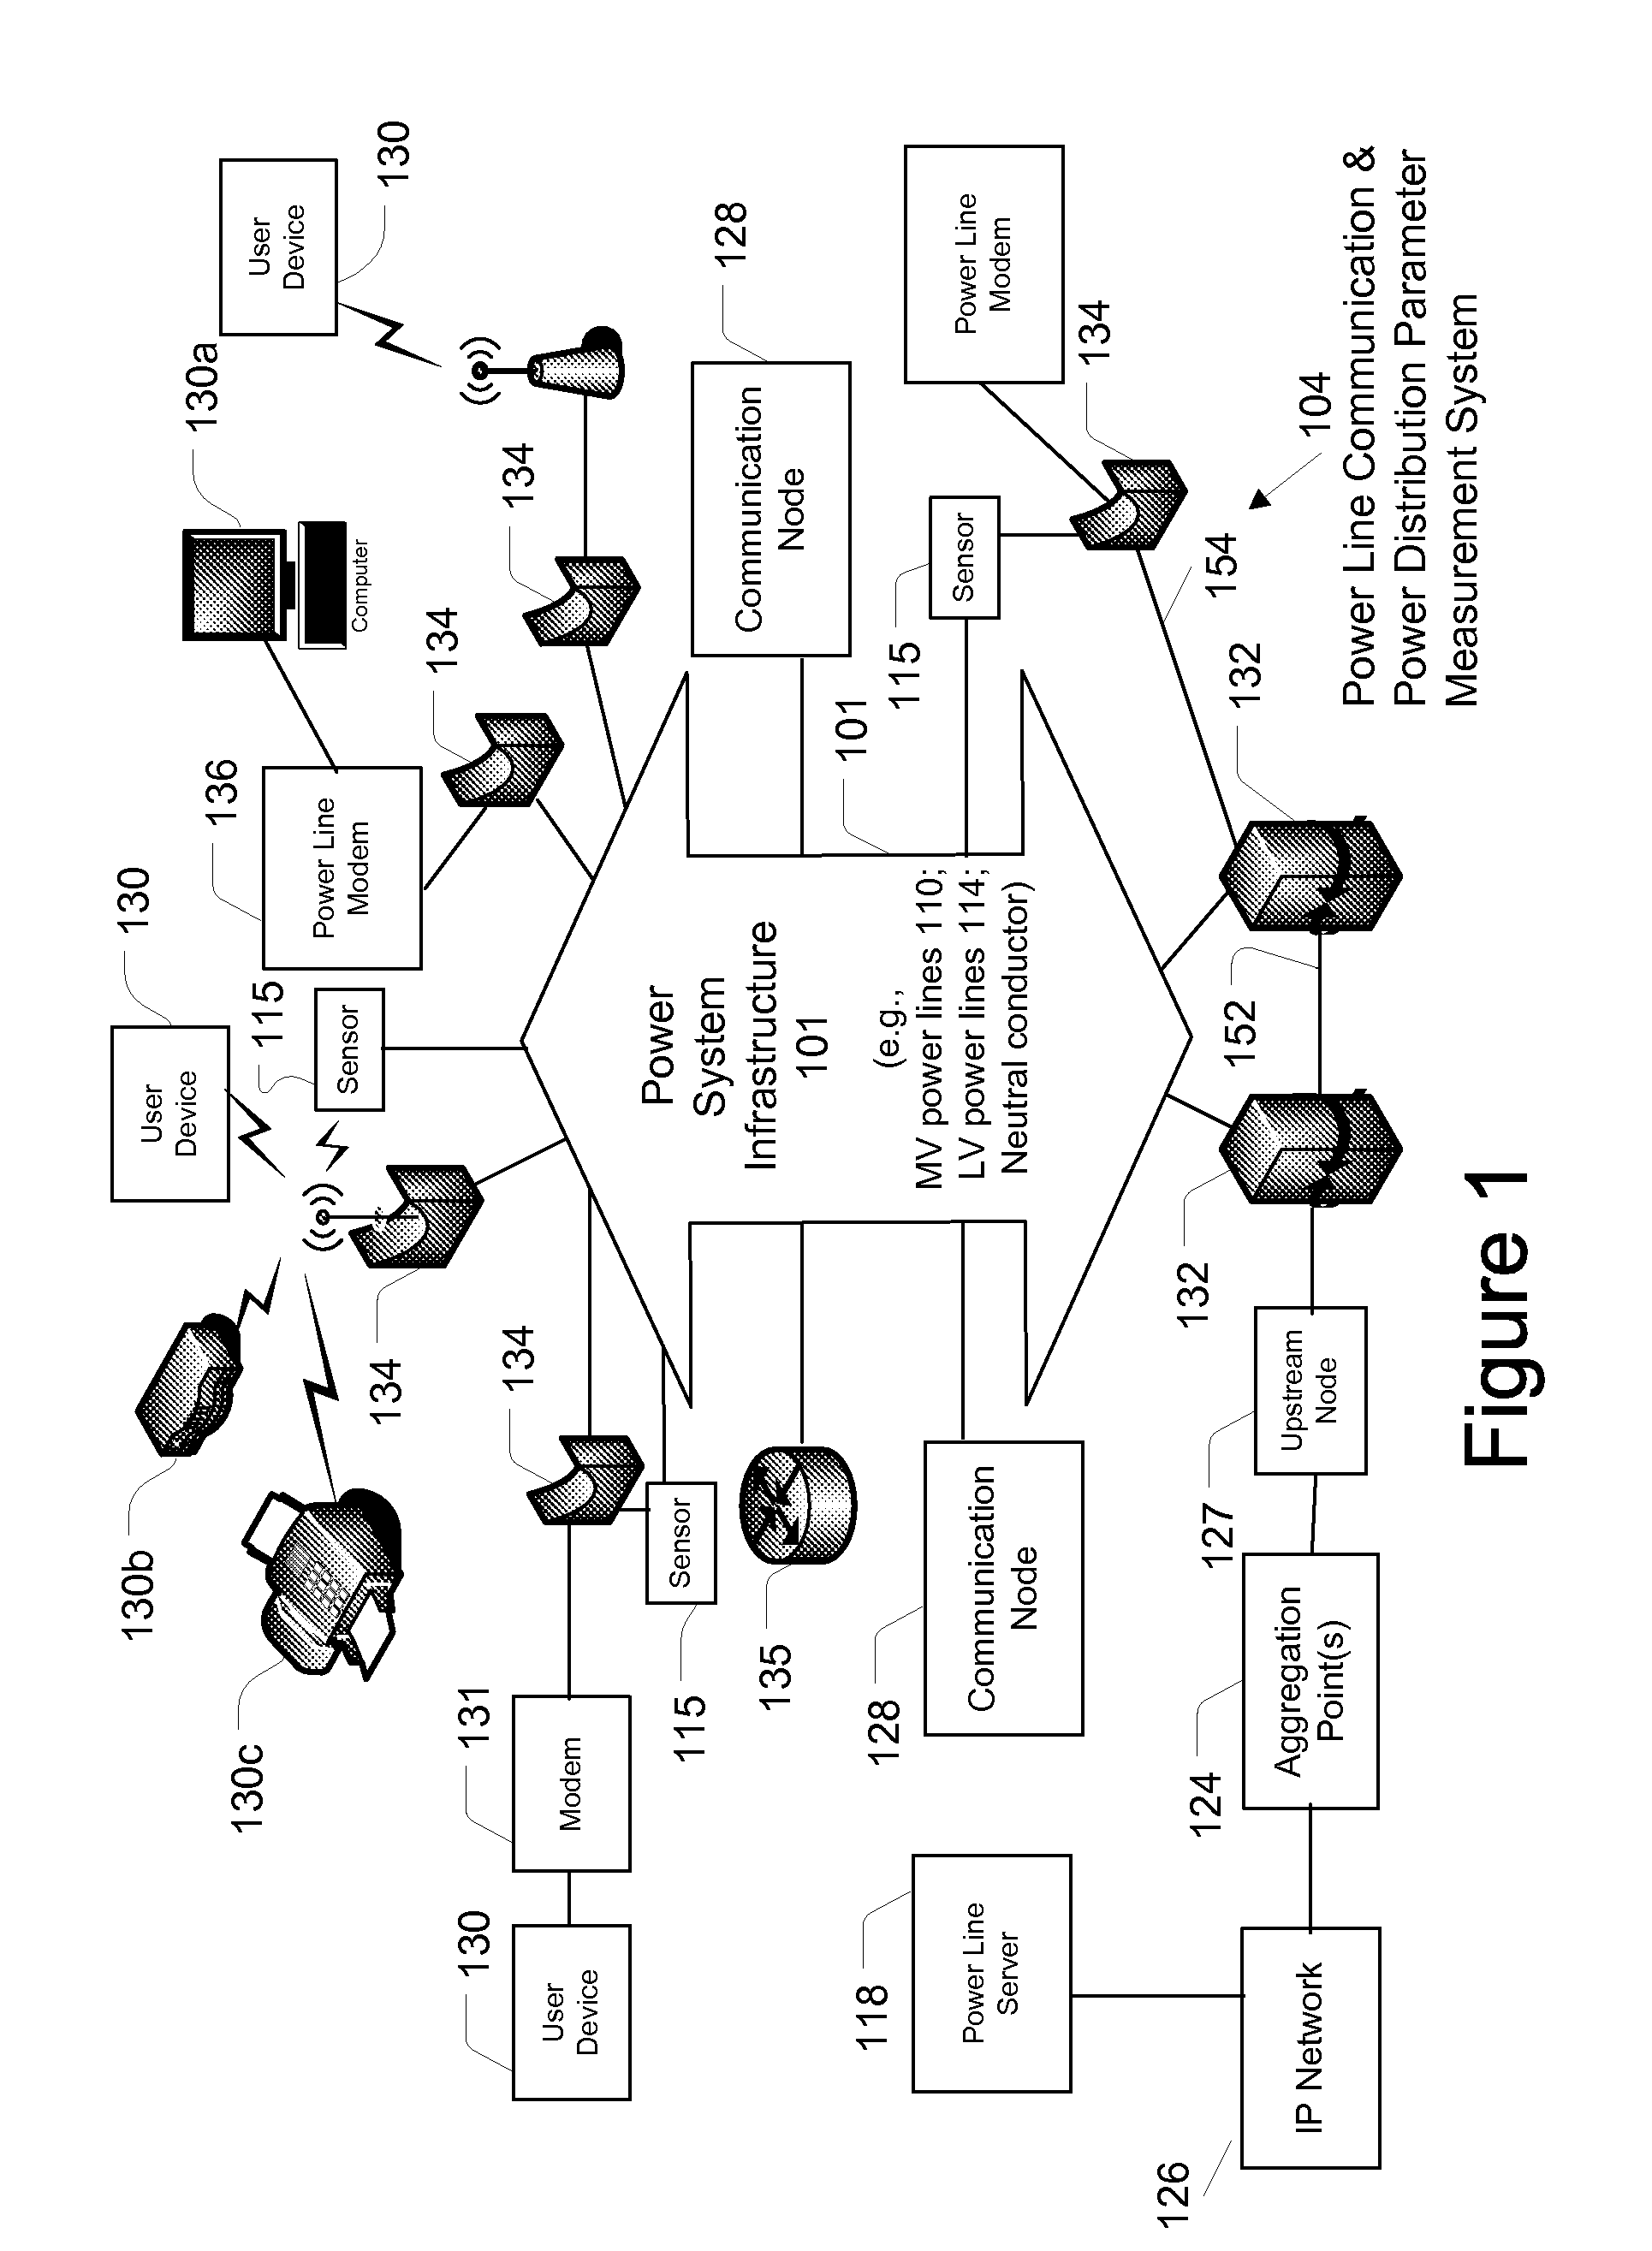 System, Device and Method For Providing Power Outage and Restoration Notification